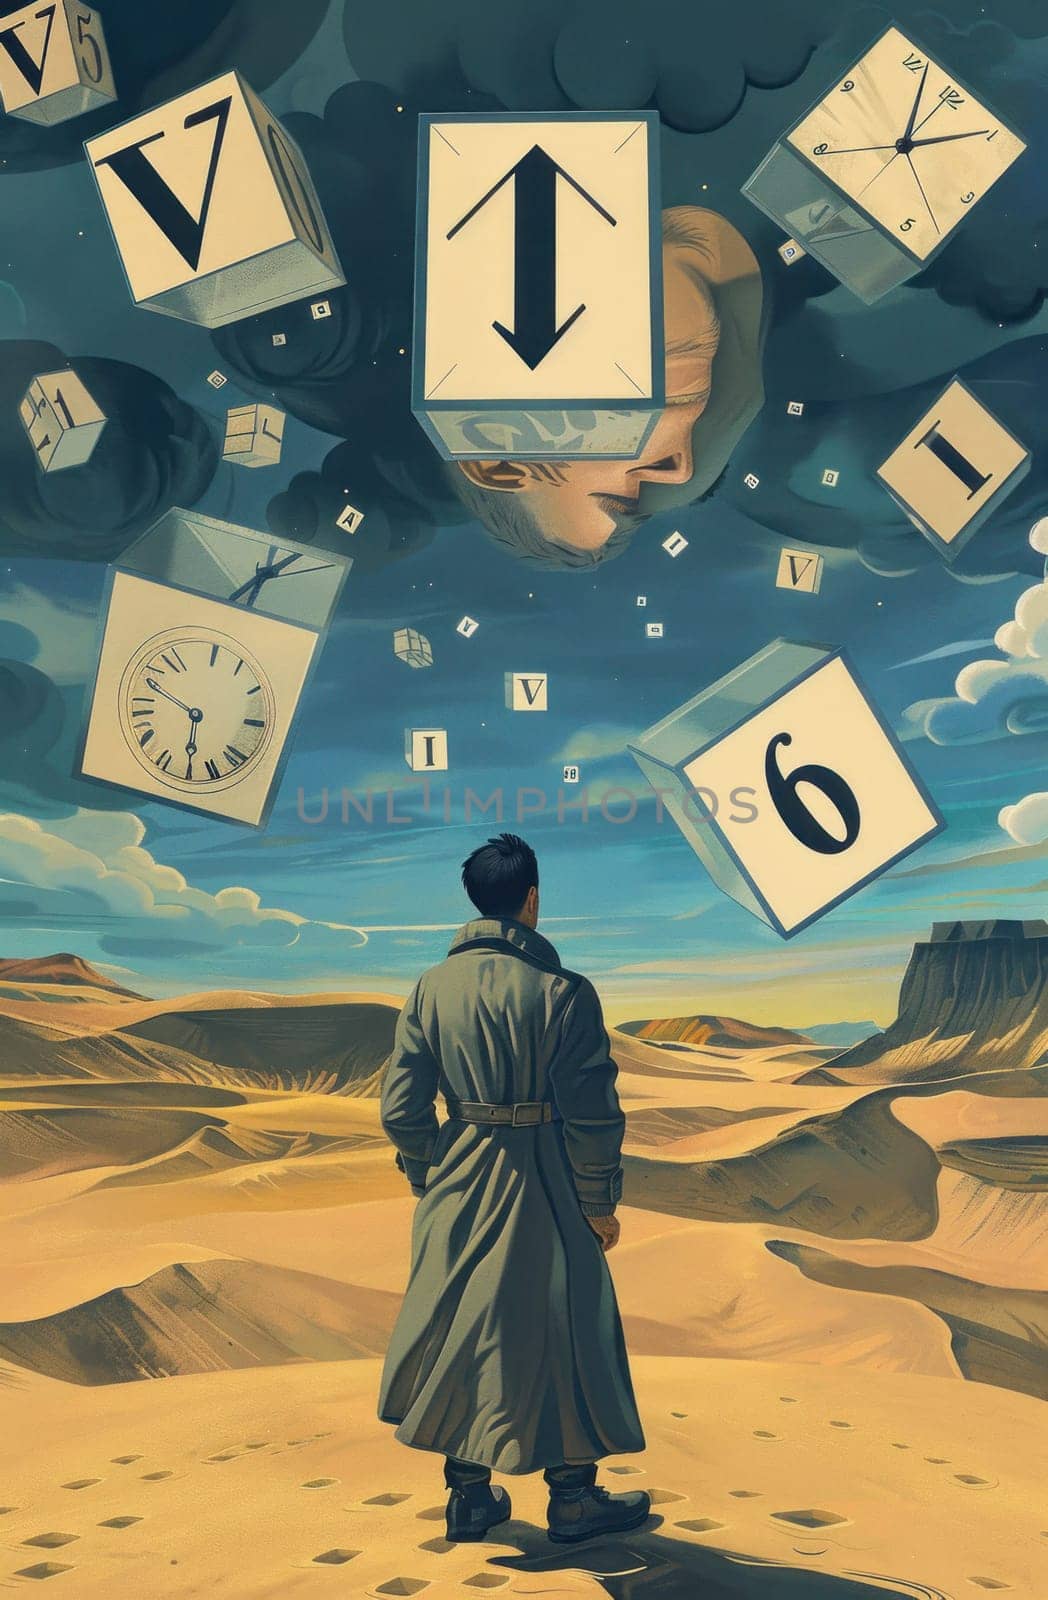 Desolate desert landscape with mysterious figure in trench coat and clock tower in distance for travel and mystery concept